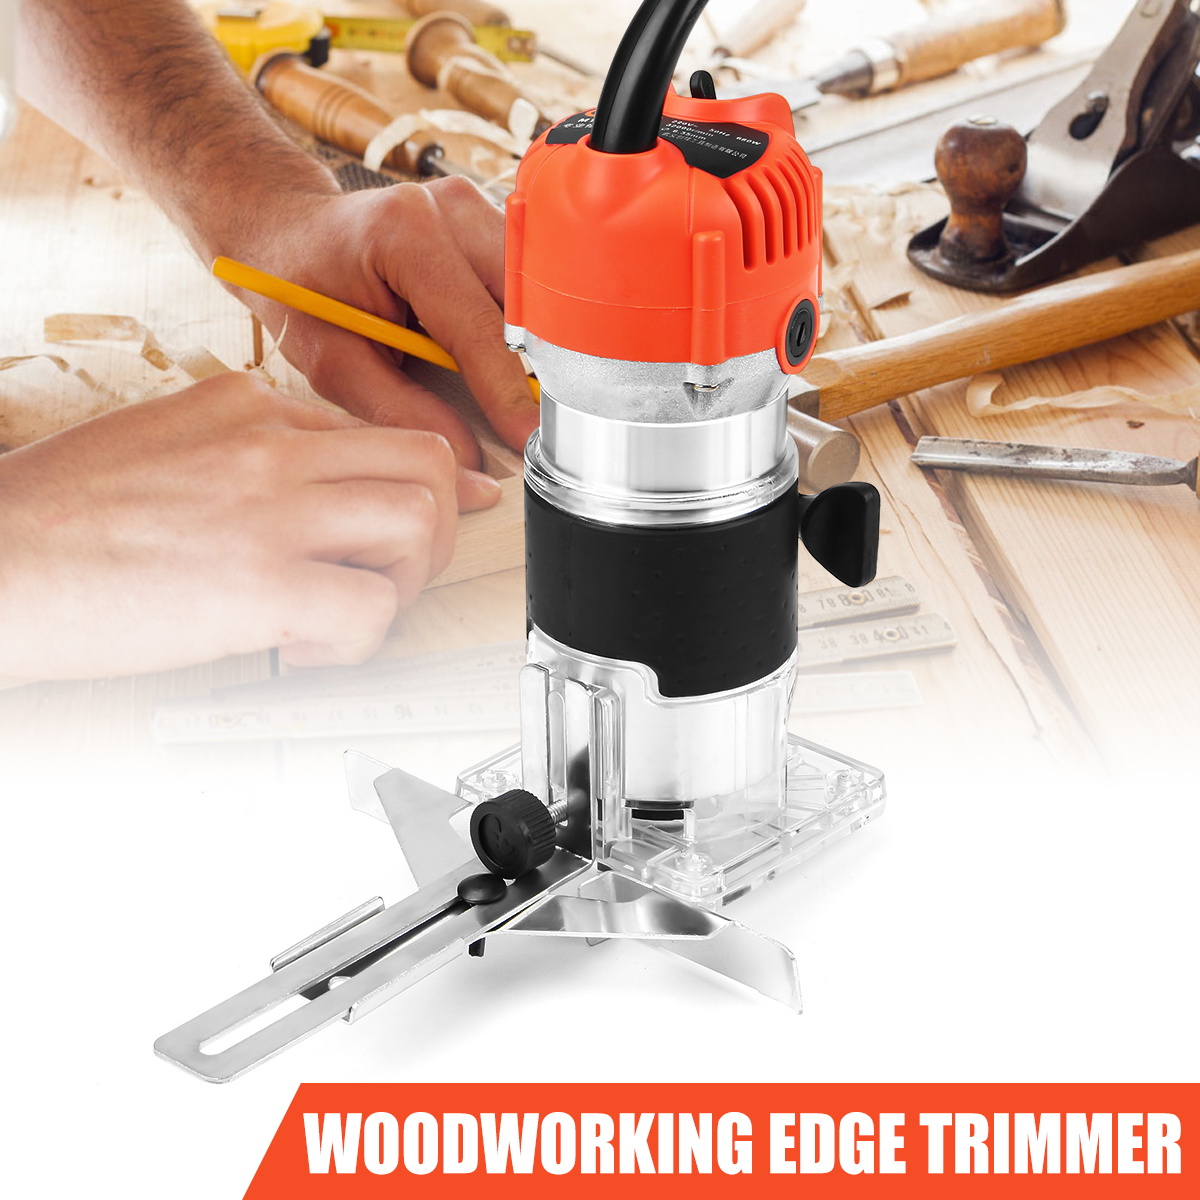 Raitooltrade-220V-680W-30000RPM-Wood-Corded-Electric-Hand-Trimmer-DIY-Tool-Router-635MM-1270211-2